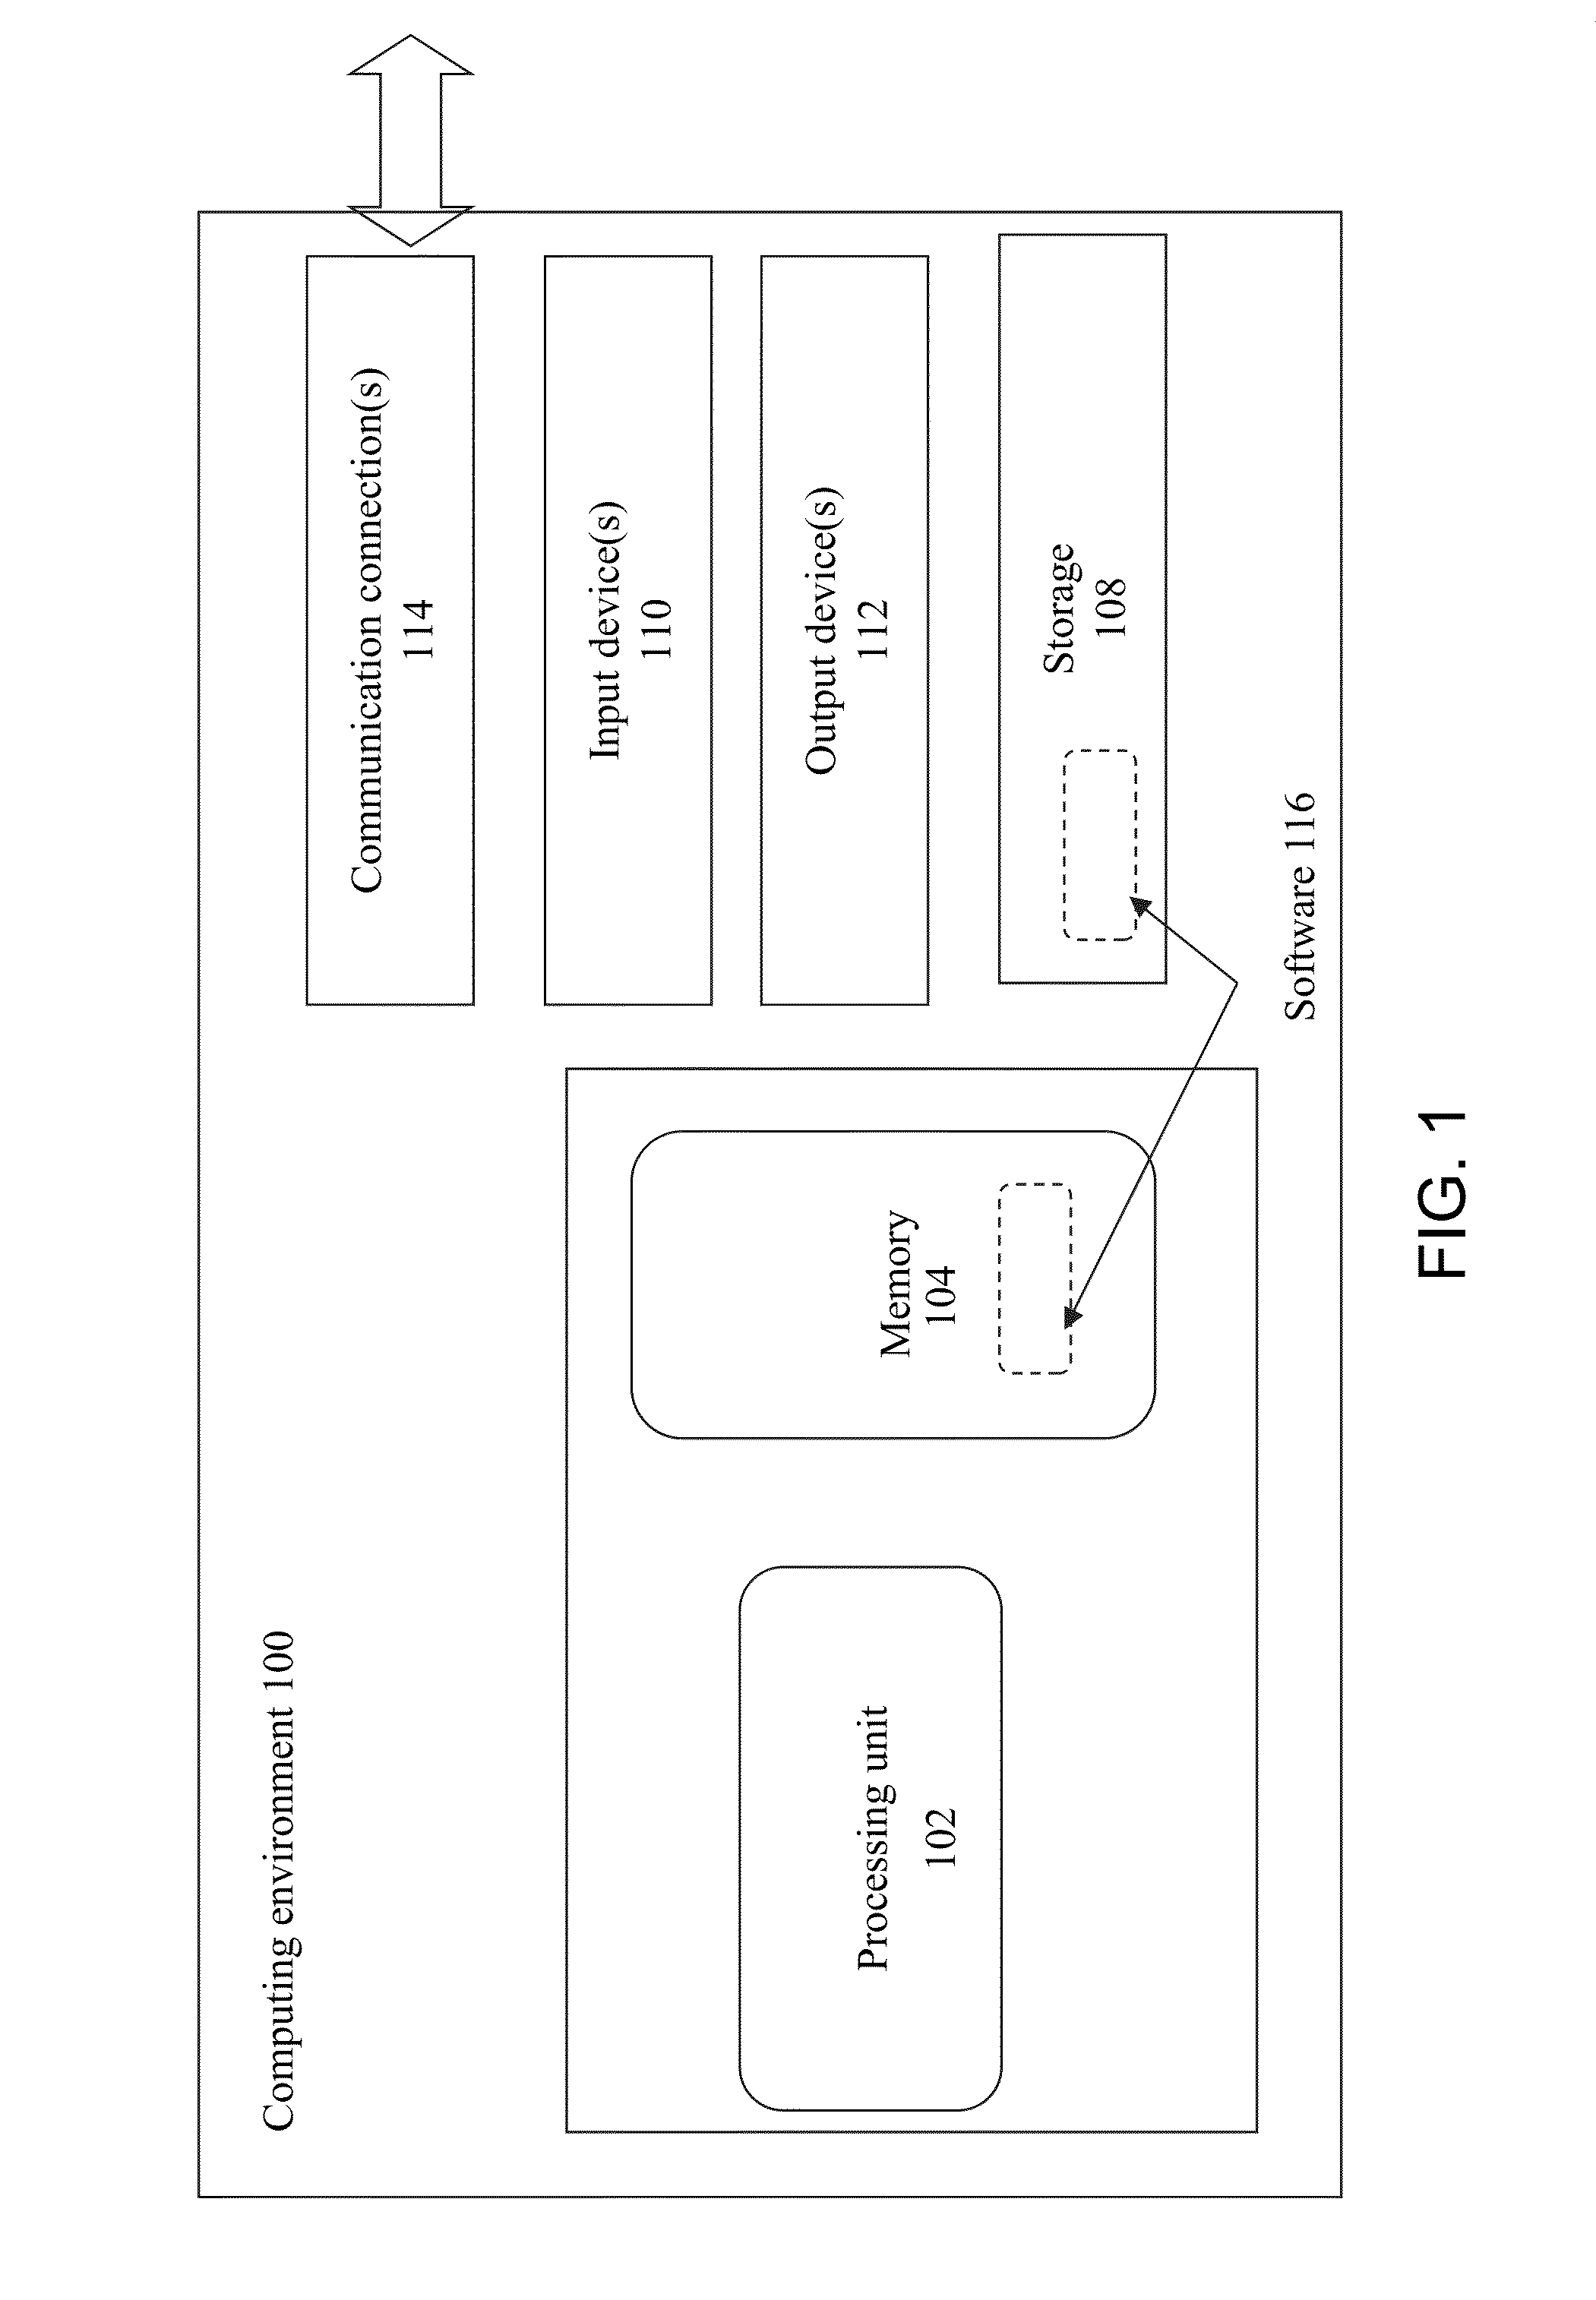 Systems and methods for estimating an impact of changing a source file in a software